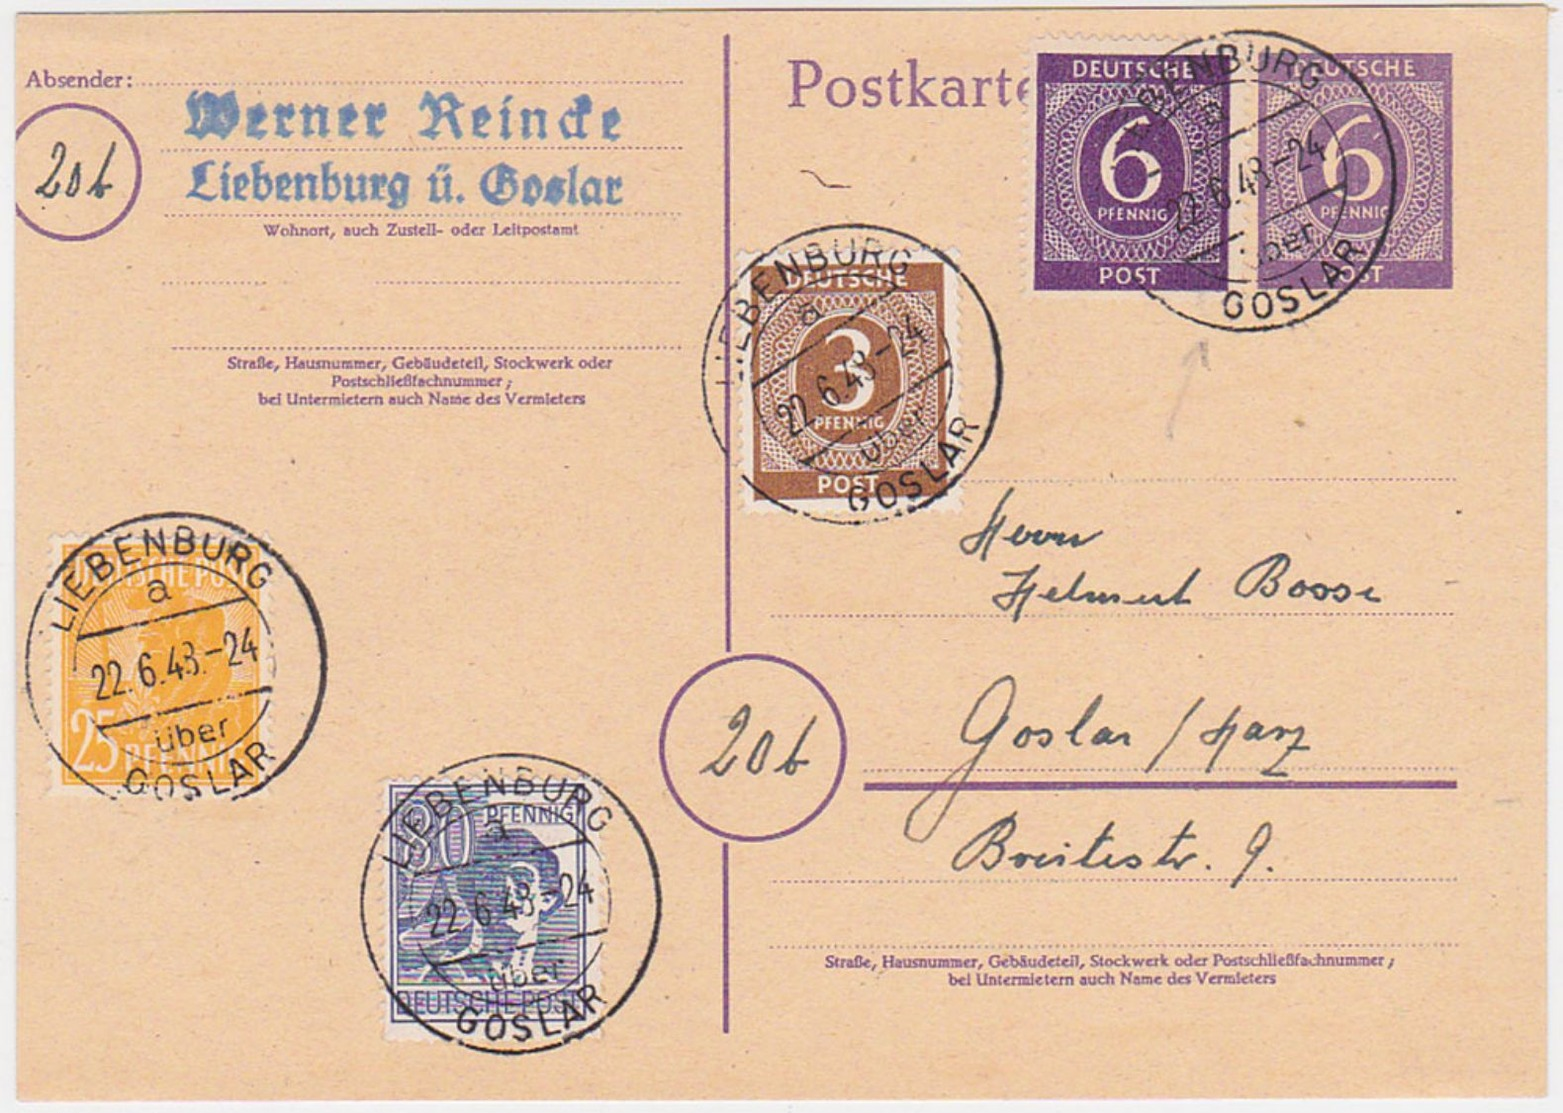 GERMANY 1948 (22.6.) P.ST.CARD P 95, LIBENBURG TO GOSLAR UPRAT.10 X CURRENCY UPRATING (correct) - Other & Unclassified